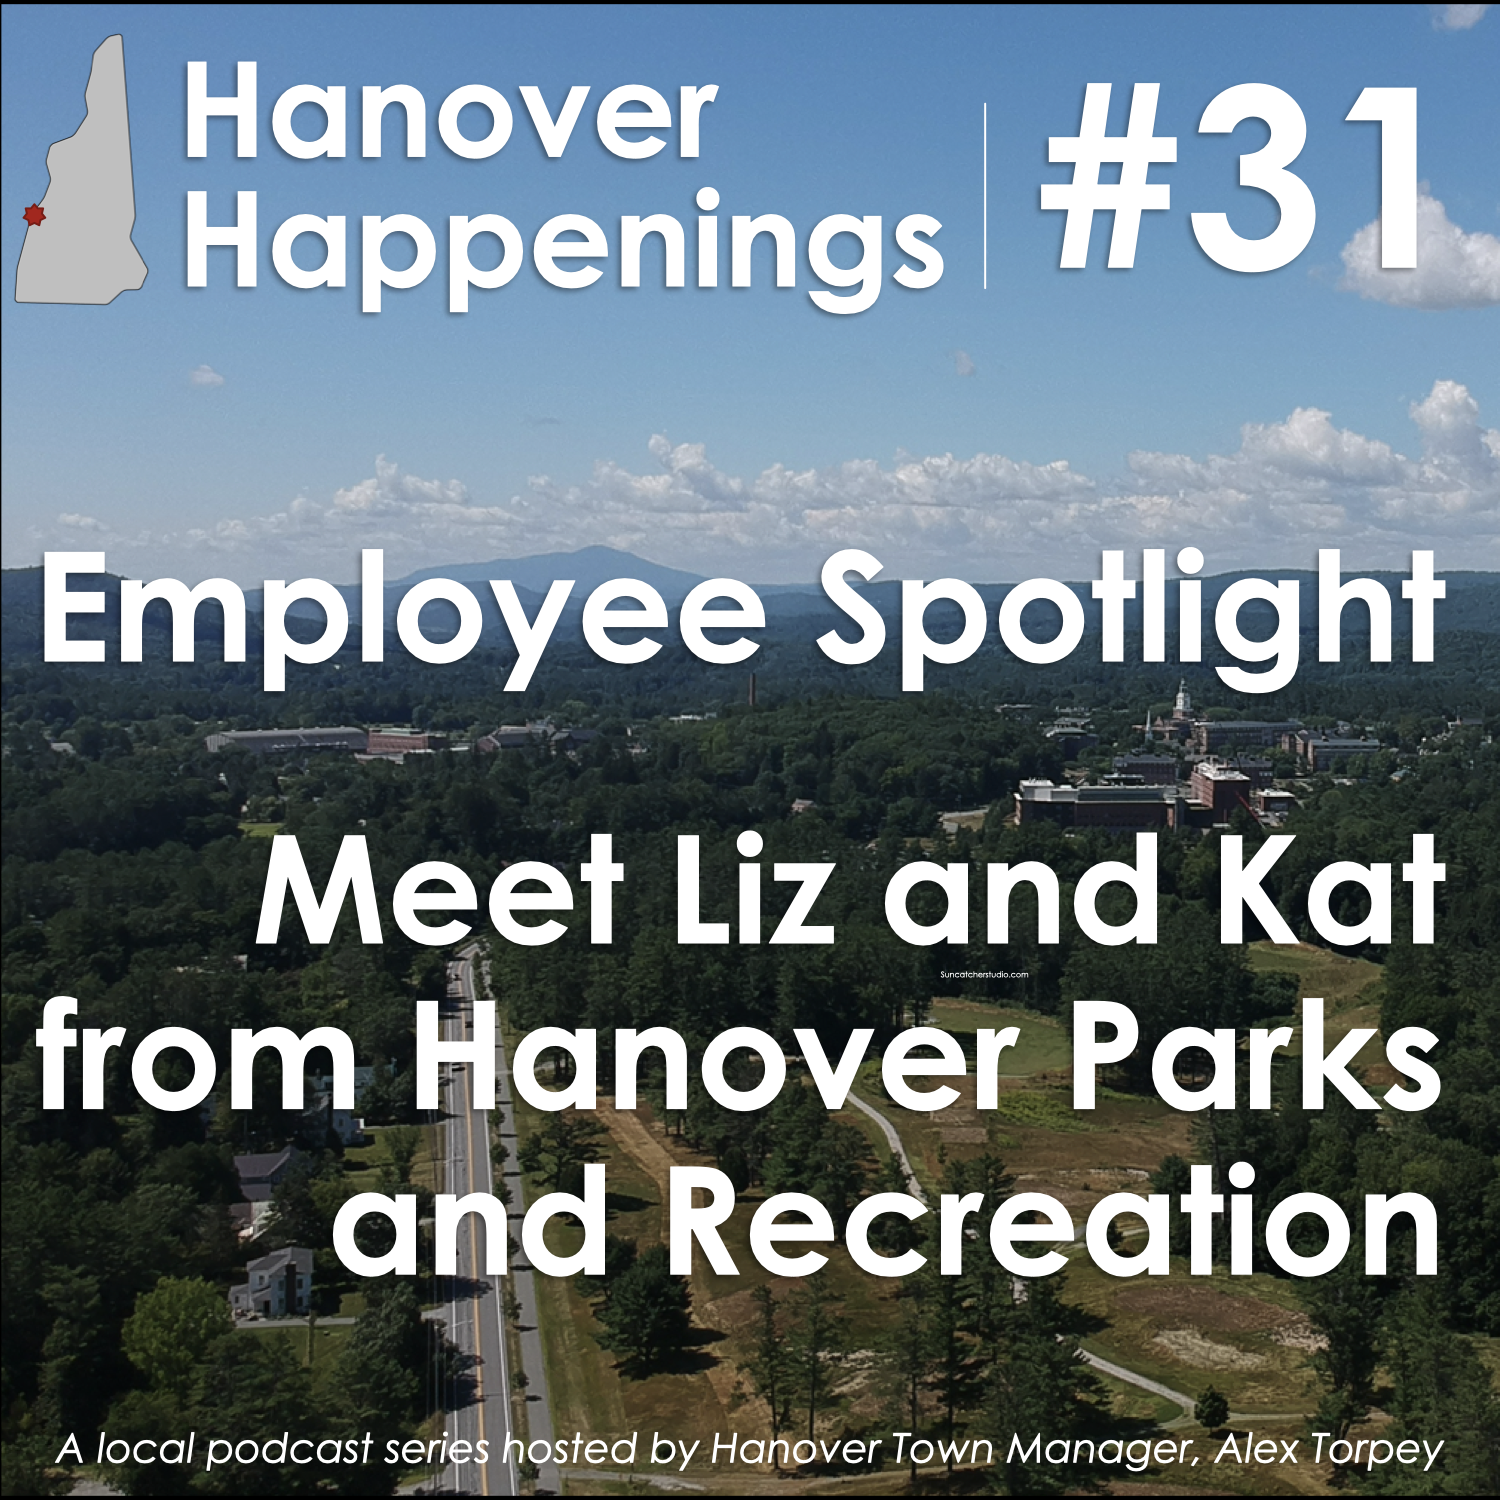 Employee Spotlight: Meet Liz and Kat from Hanover Parks and Rec